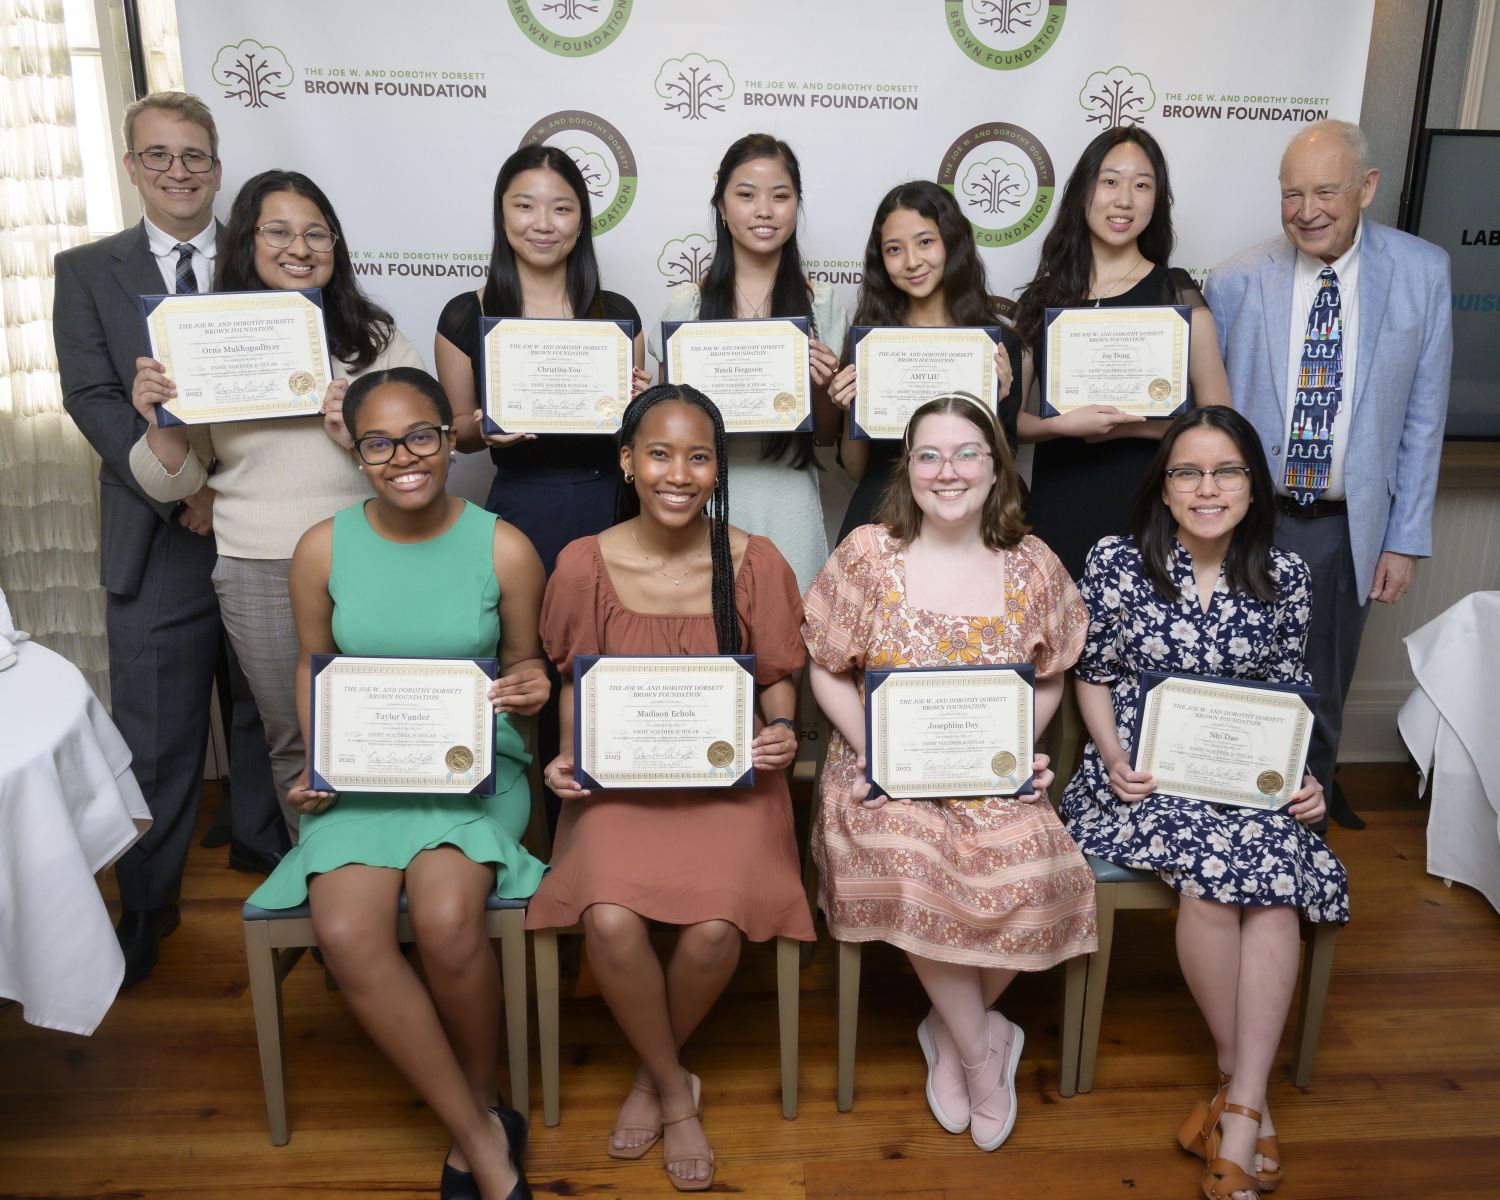 2023 Emmy Noether Scholars pictured with Professor Hunter and Ed Hunter from L to R:  (seated) Taylor Vander, Madison Echols, Josephine Day, Nhi Dao ; (standing)  Orna Mukhopadhyay, Christina You, Nateli Ferguson, Amy Liu, Joy Dong